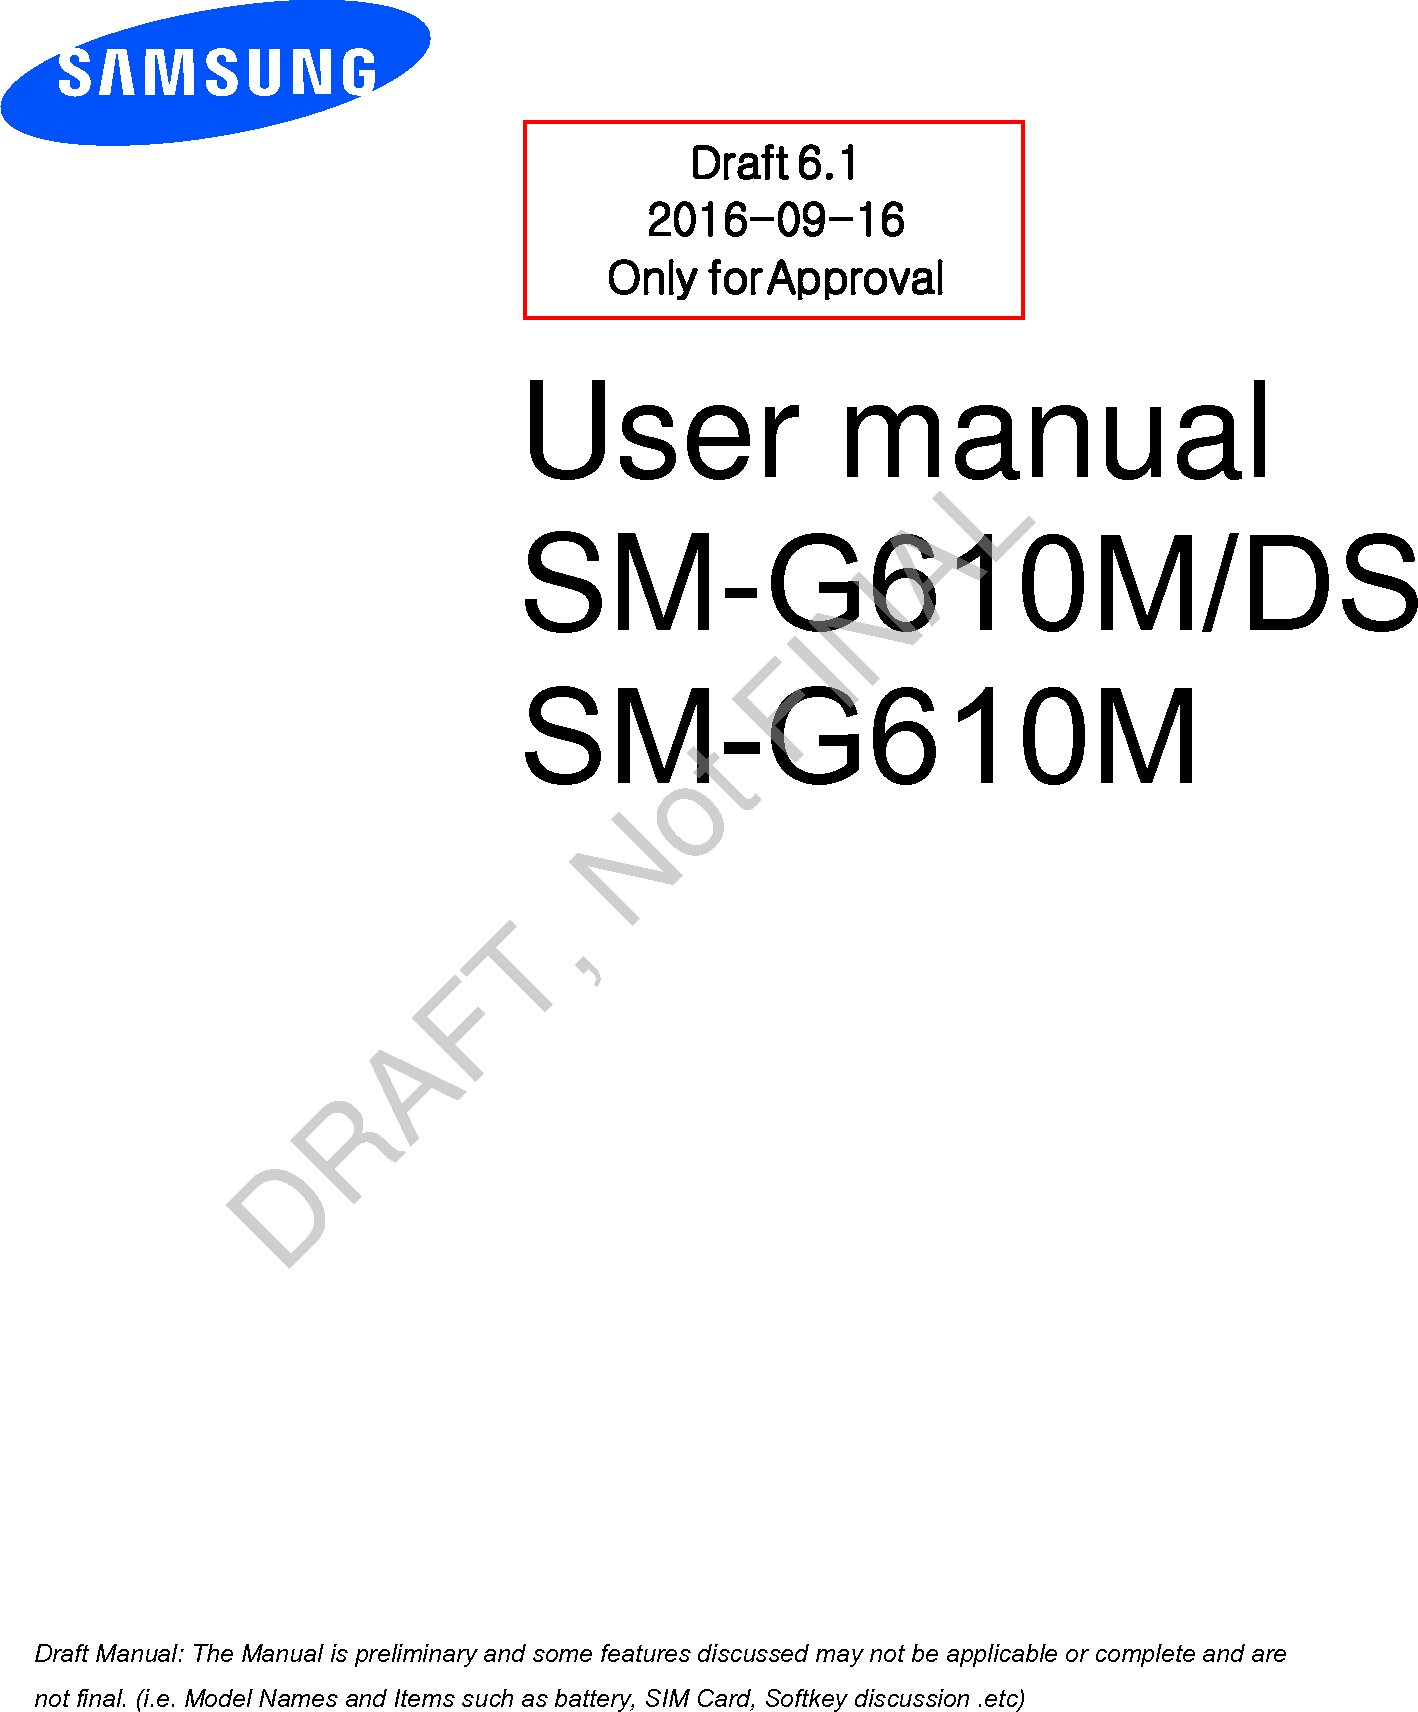 User manual SM-G610M/DSSM-G610M Draft 6.1 2016-09-16 Only for Approval a ana  ana  na and  a dd a n  aa   and a n na  d a and   a a  ad  dn DRAFT, Not FINAL